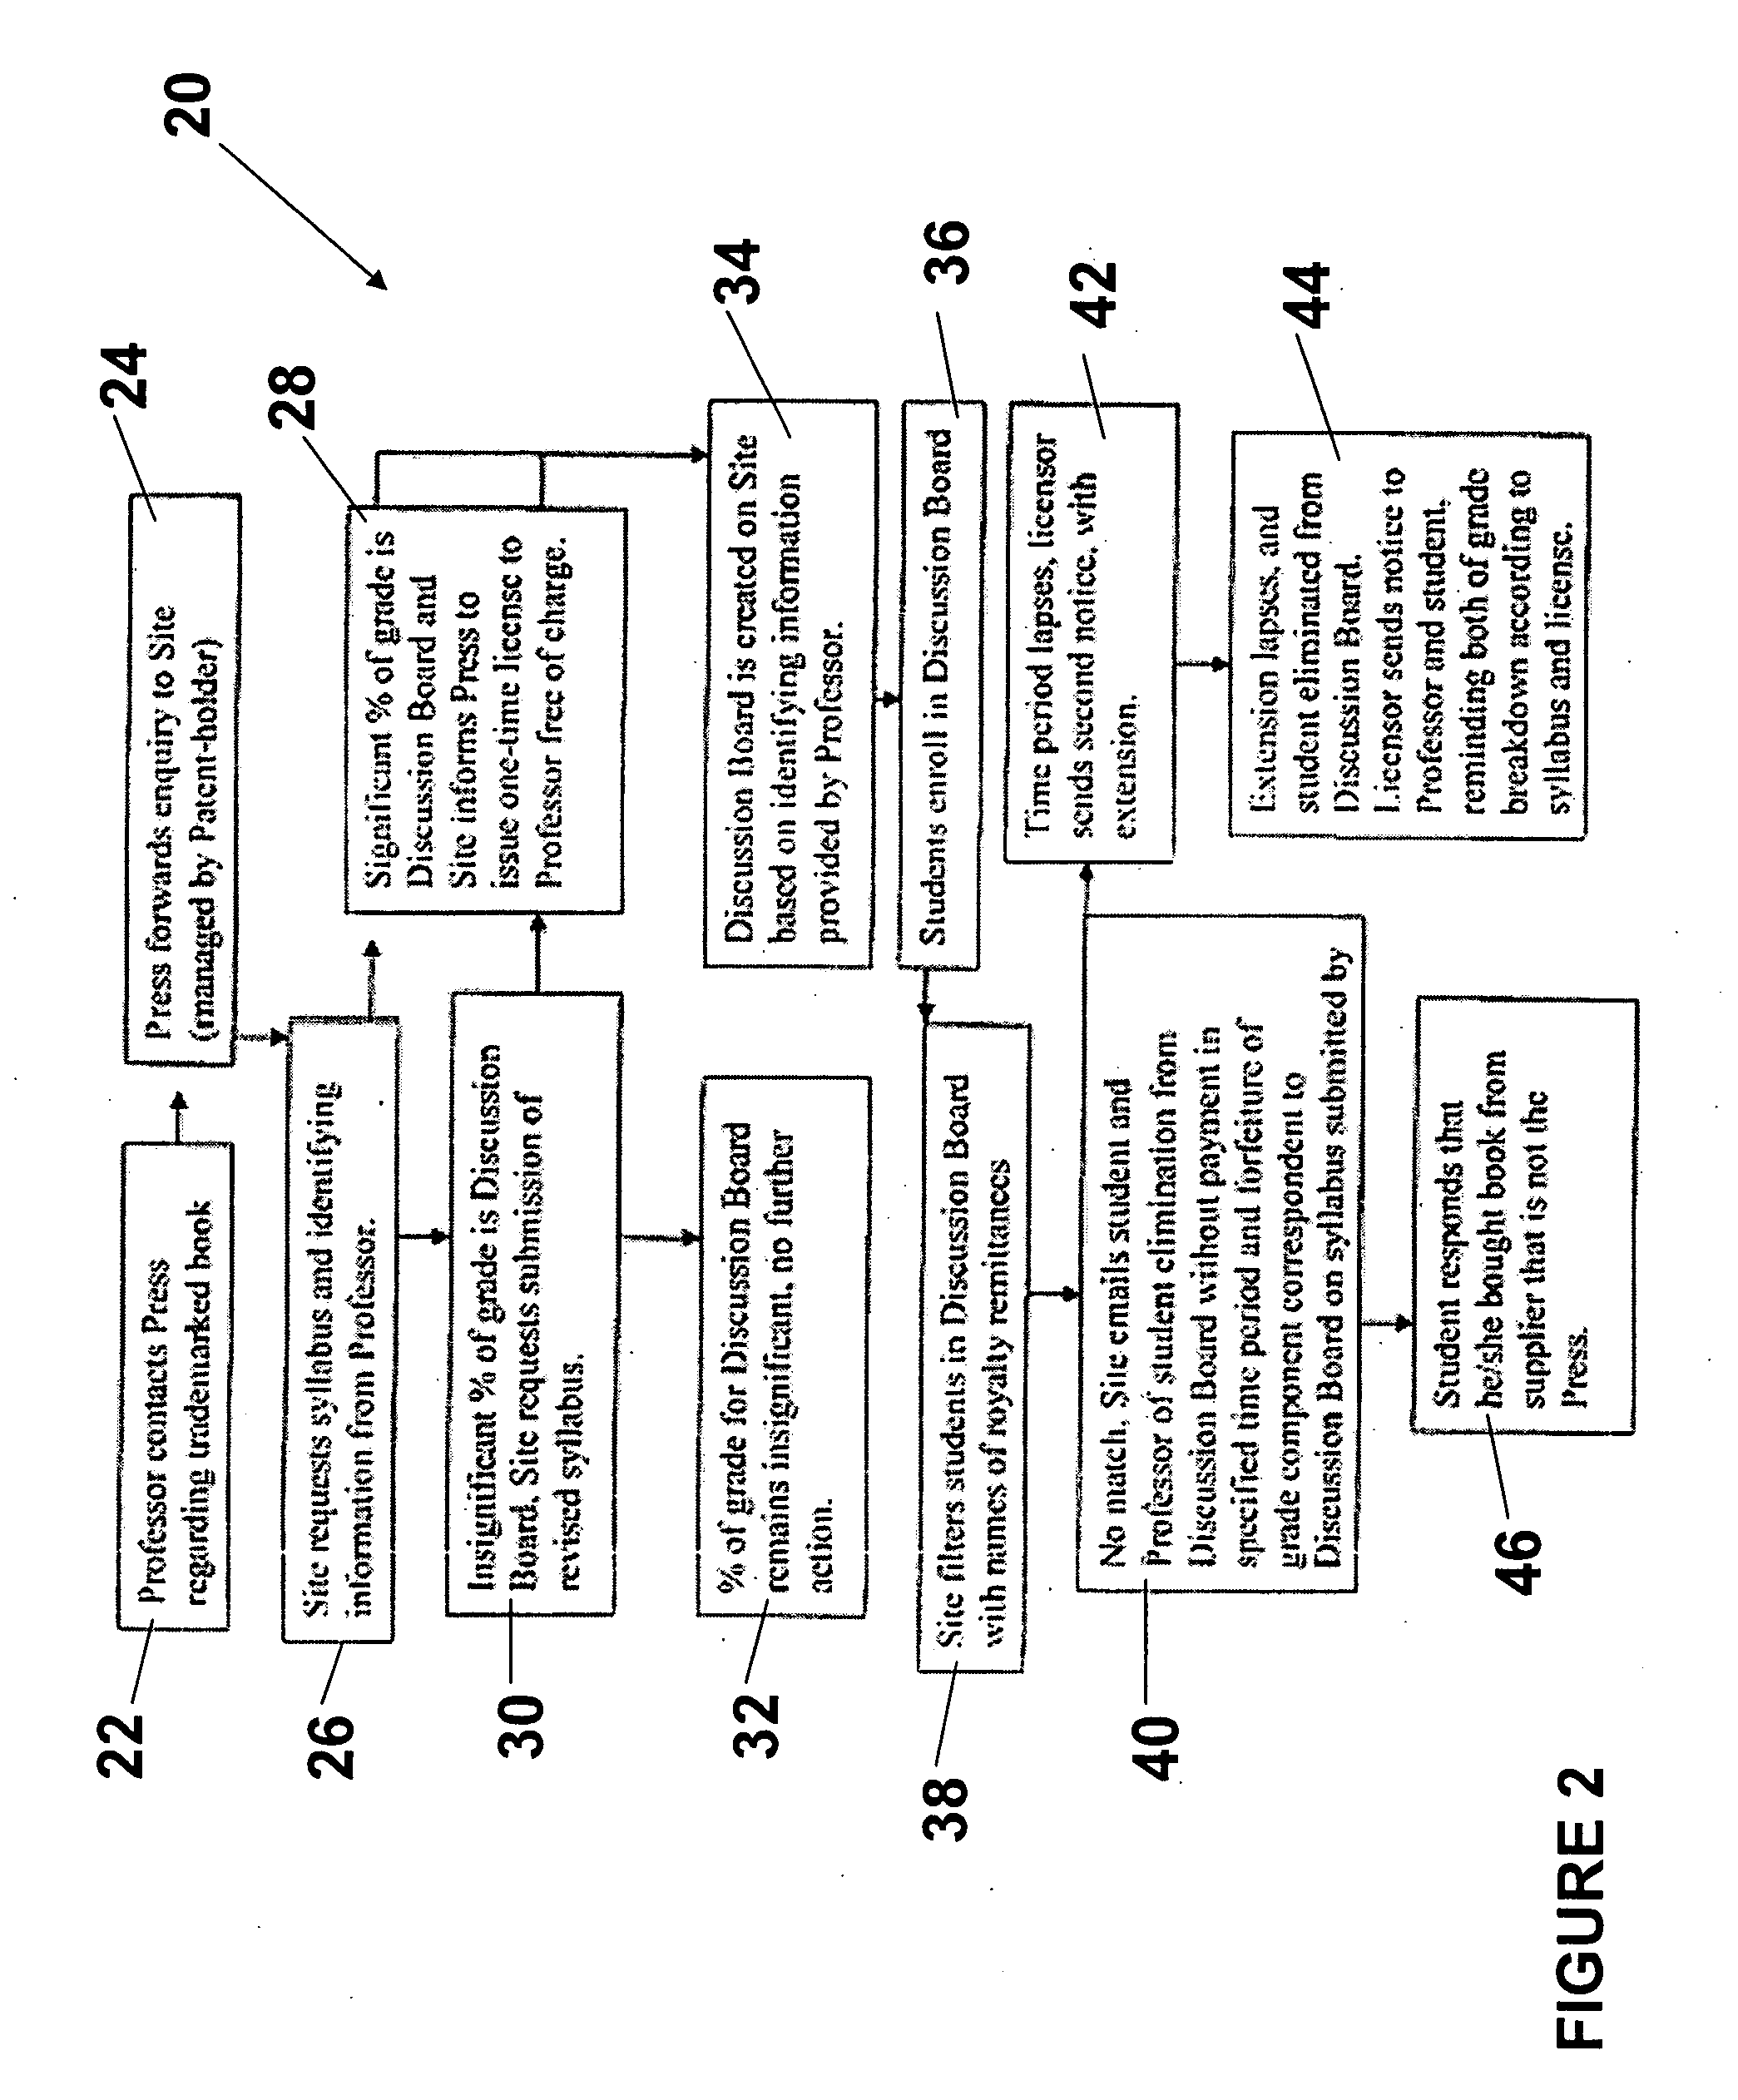 Web-based system and method for preventing unauthorized access to copyrighted academic texts